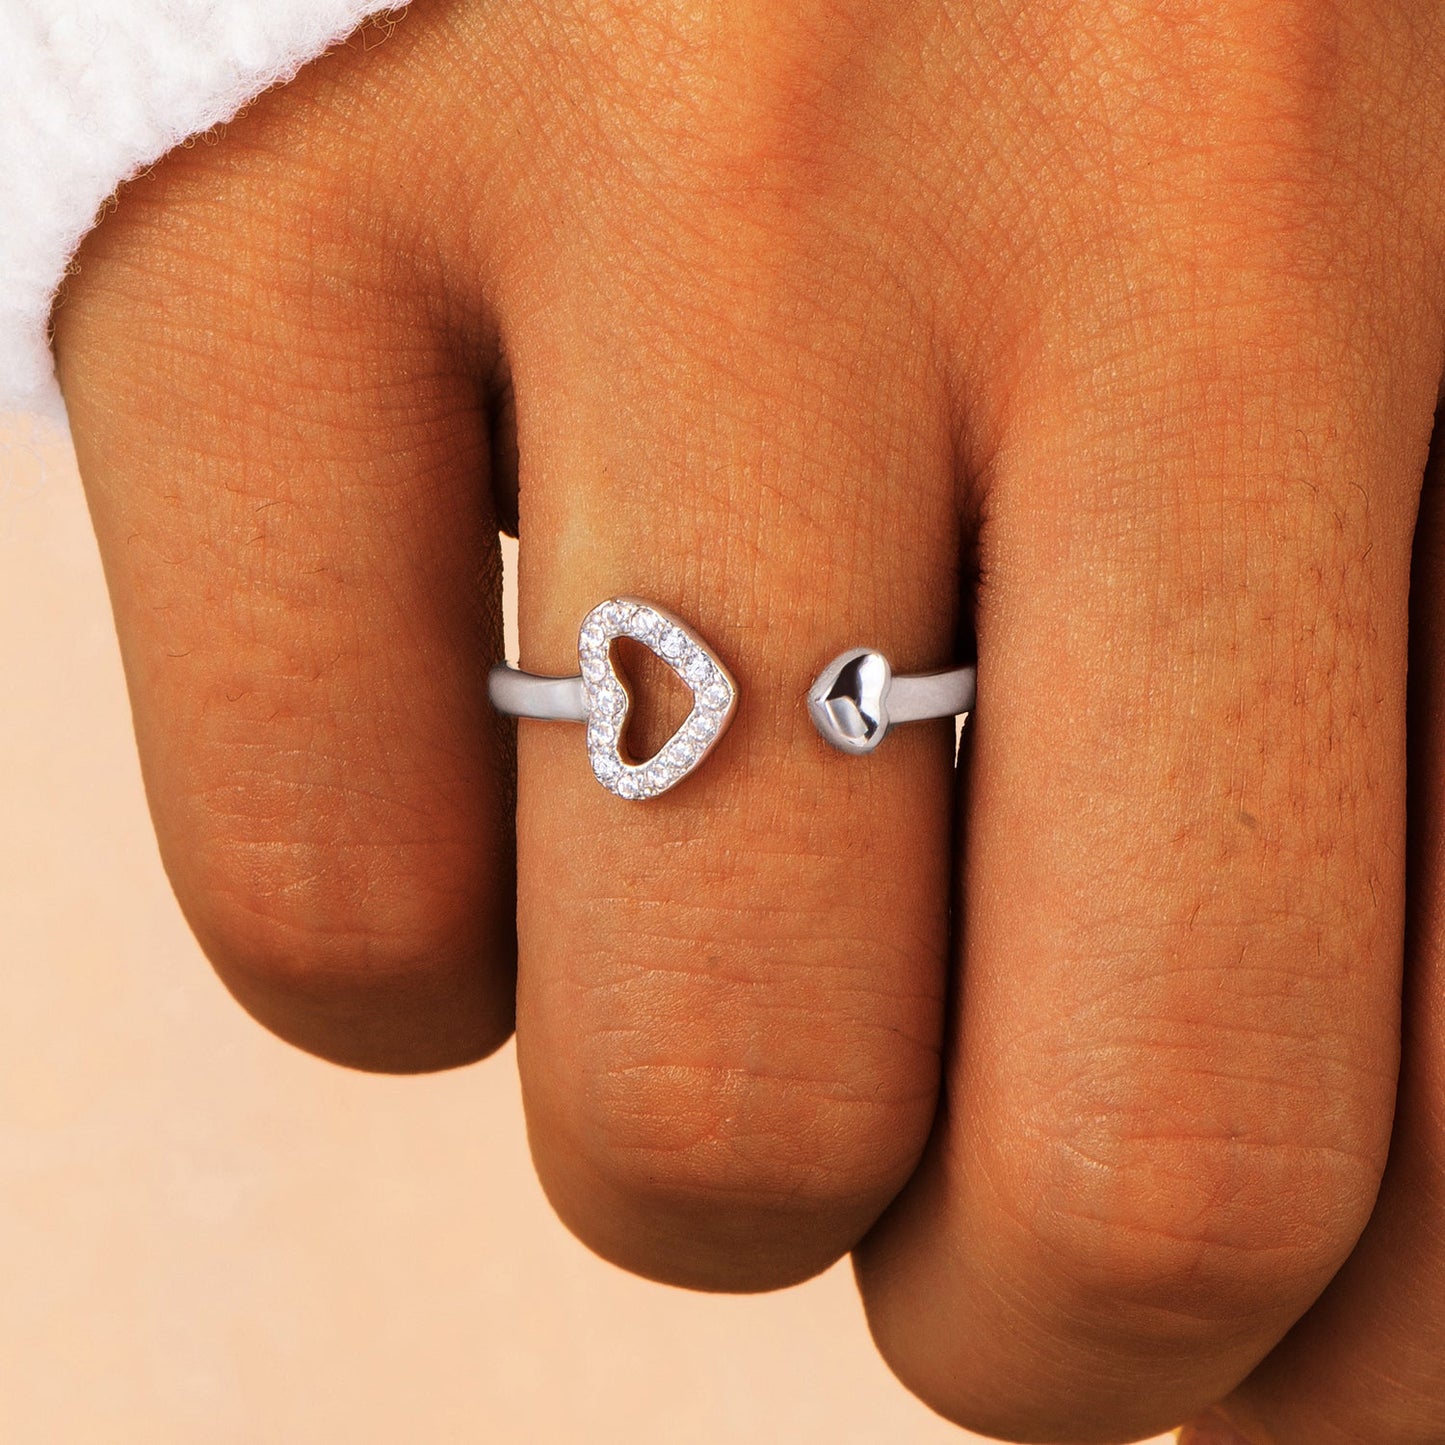 To My Wife "Thank you for finding me" Double Heart Ring